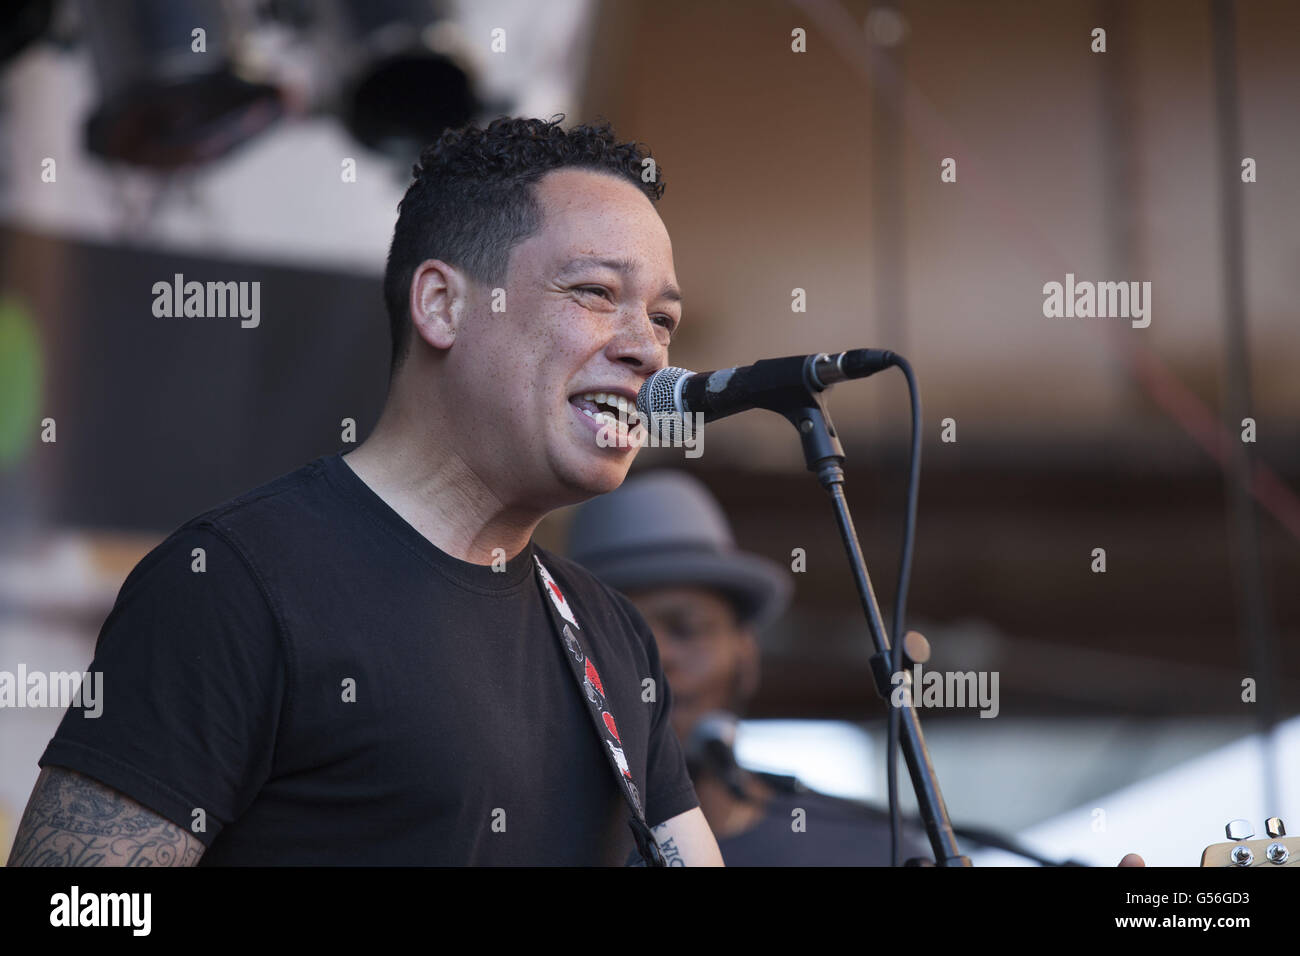 Chicago, Illinois, USA. 19th June, 2016. Maceo Haymes of The O'My's performing live at Wicker Parks, Green Music Festival in Chicago Illinois © Rick Majewski/ZUMA Wire/Alamy Live News Stock Photo